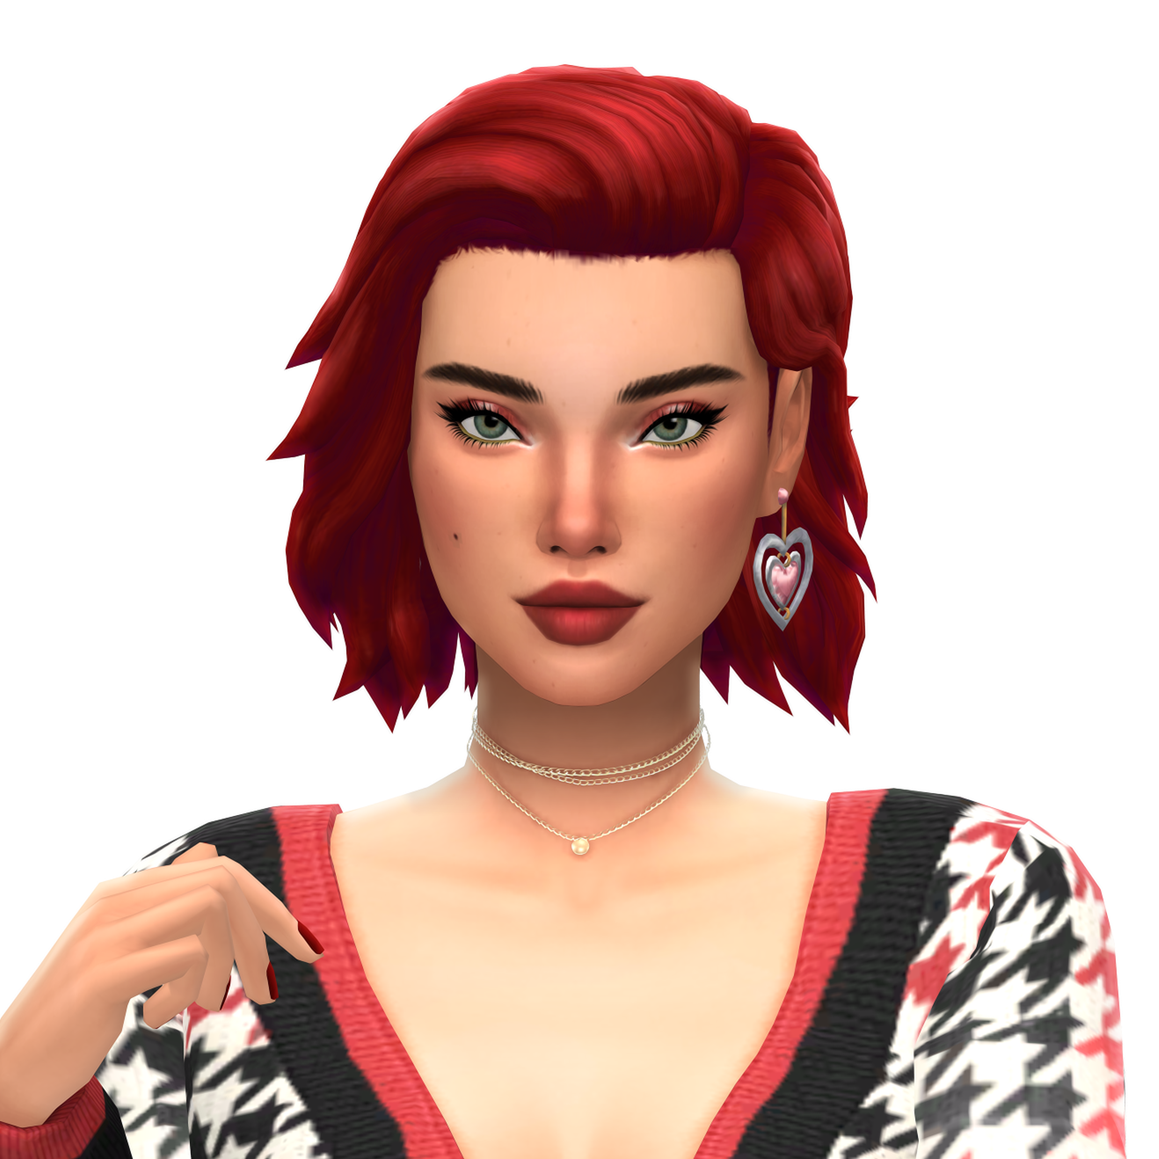 Download Raya Hair - The Sims 4 Mods - CurseForge